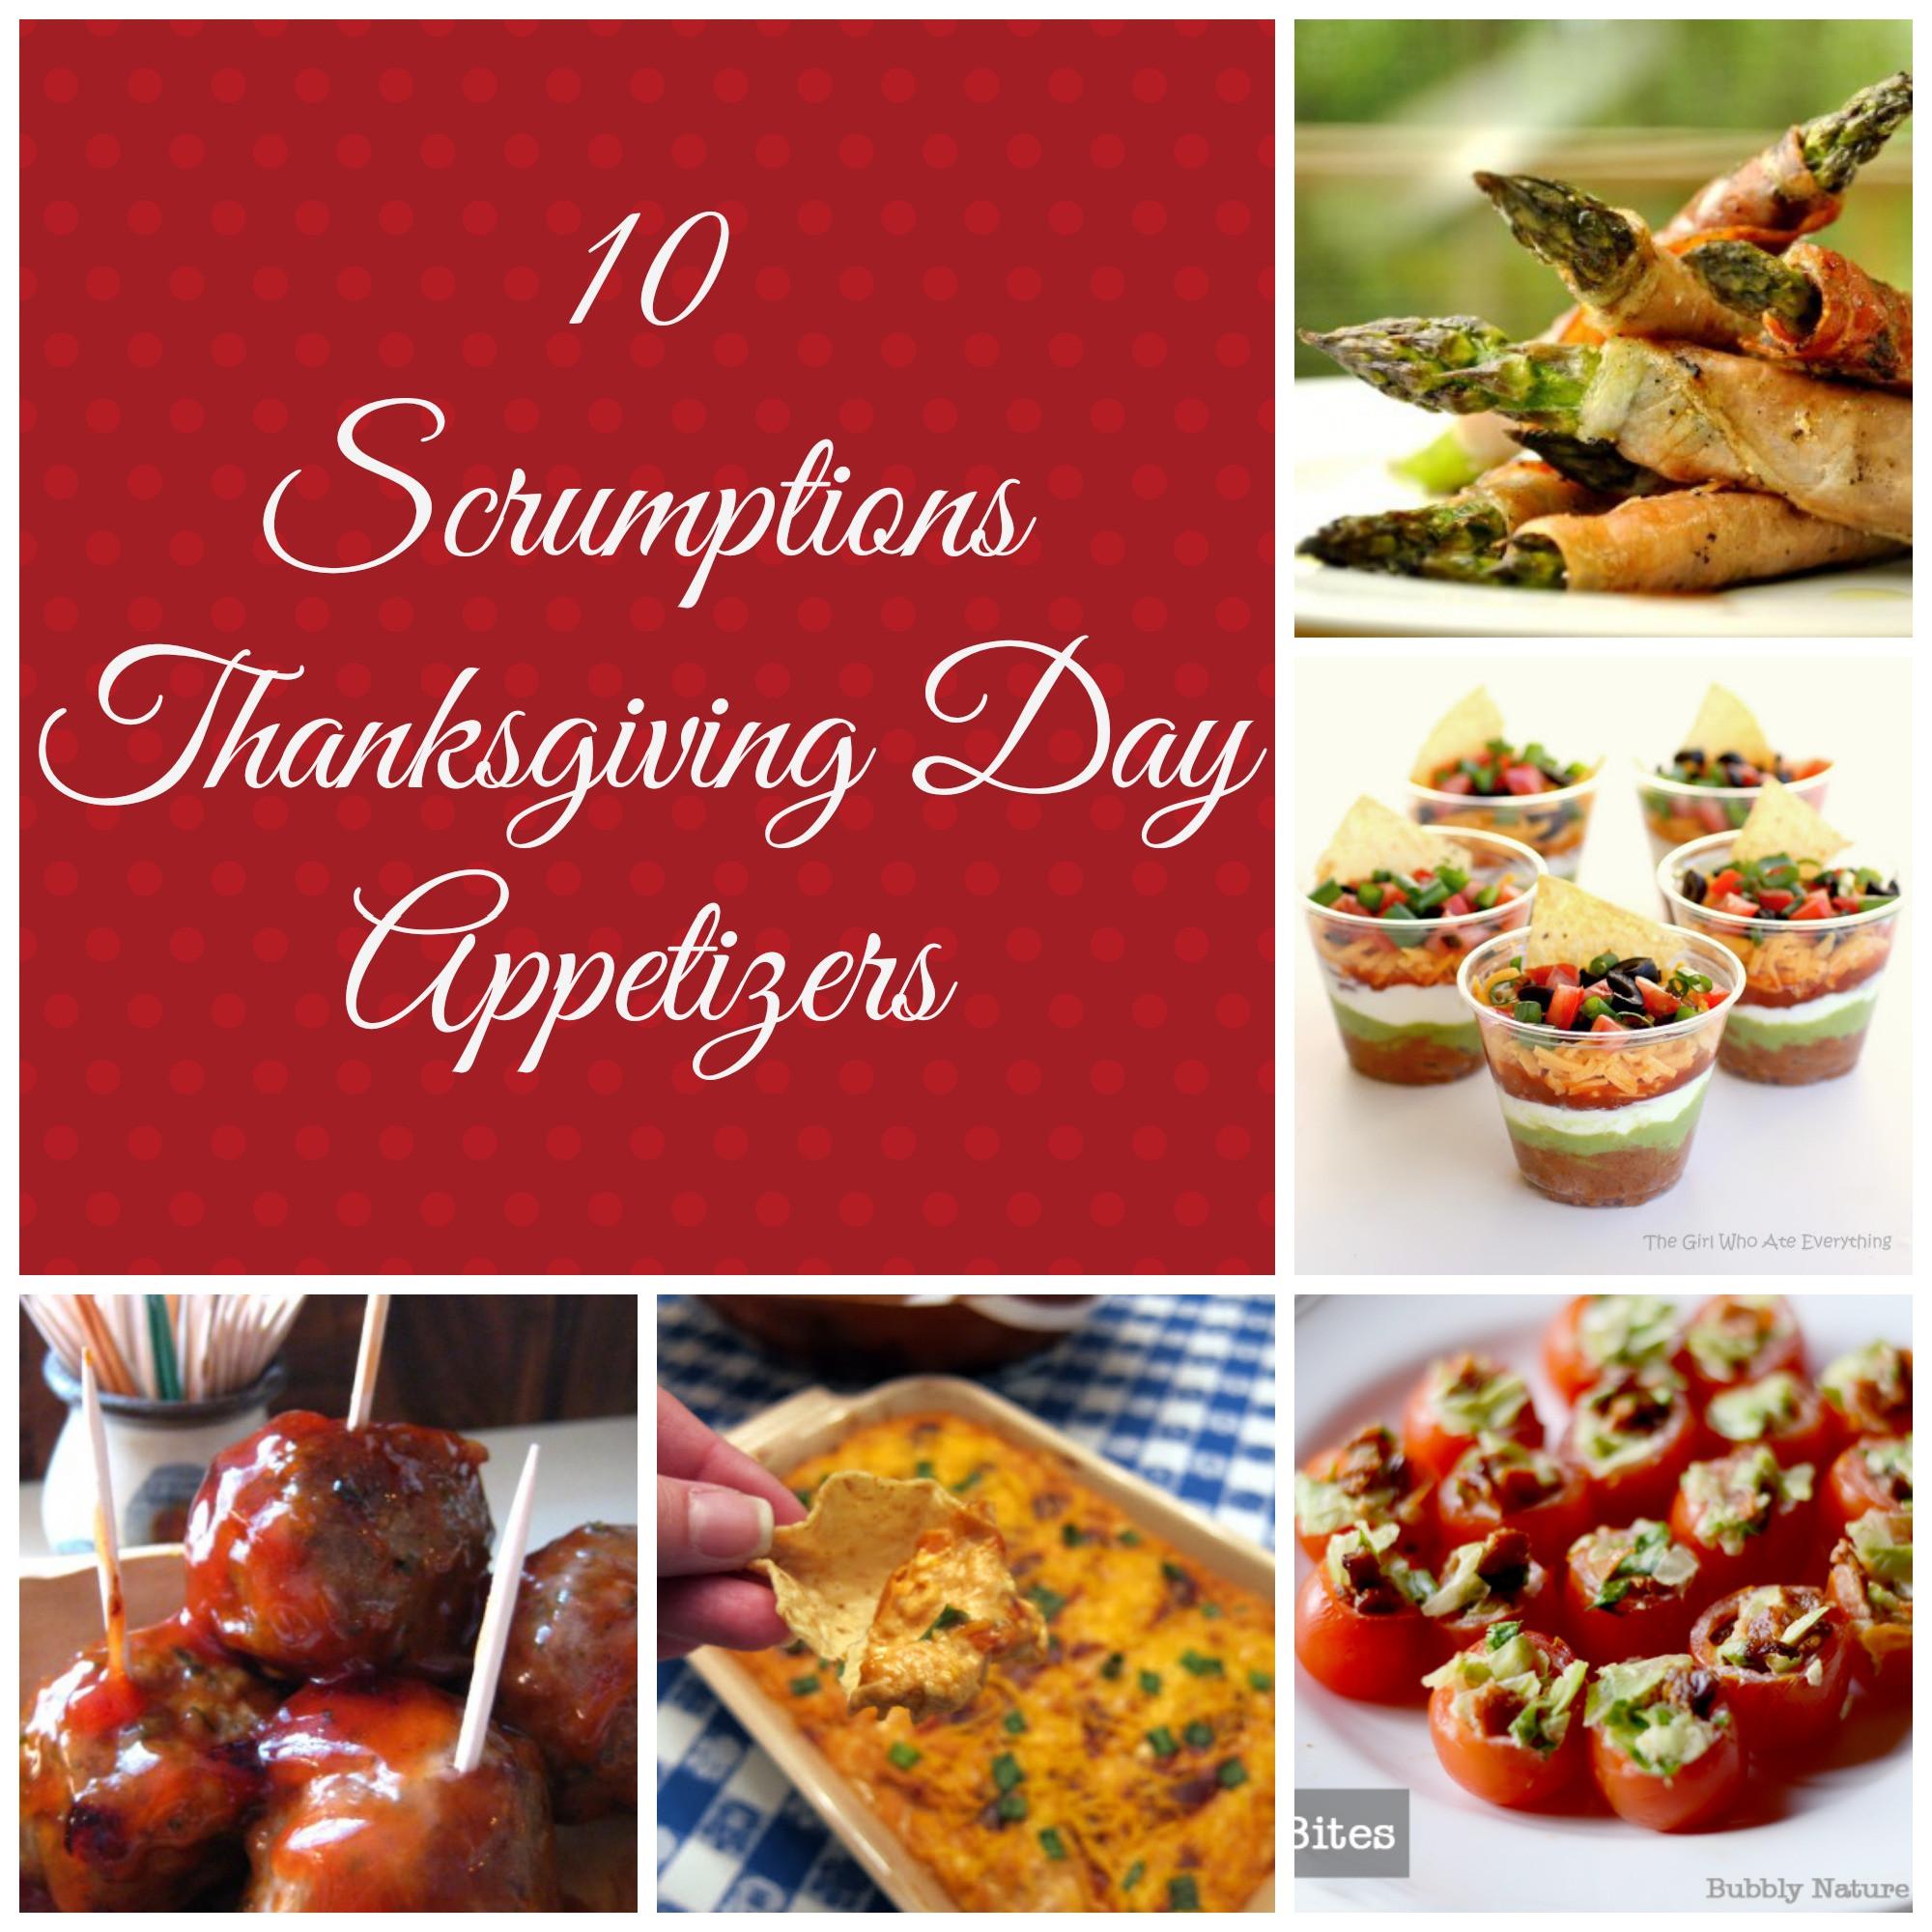 Thanksgiving Day Appetizers
 10 Scrumptious Thanksgiving Day Appetizers Detroit